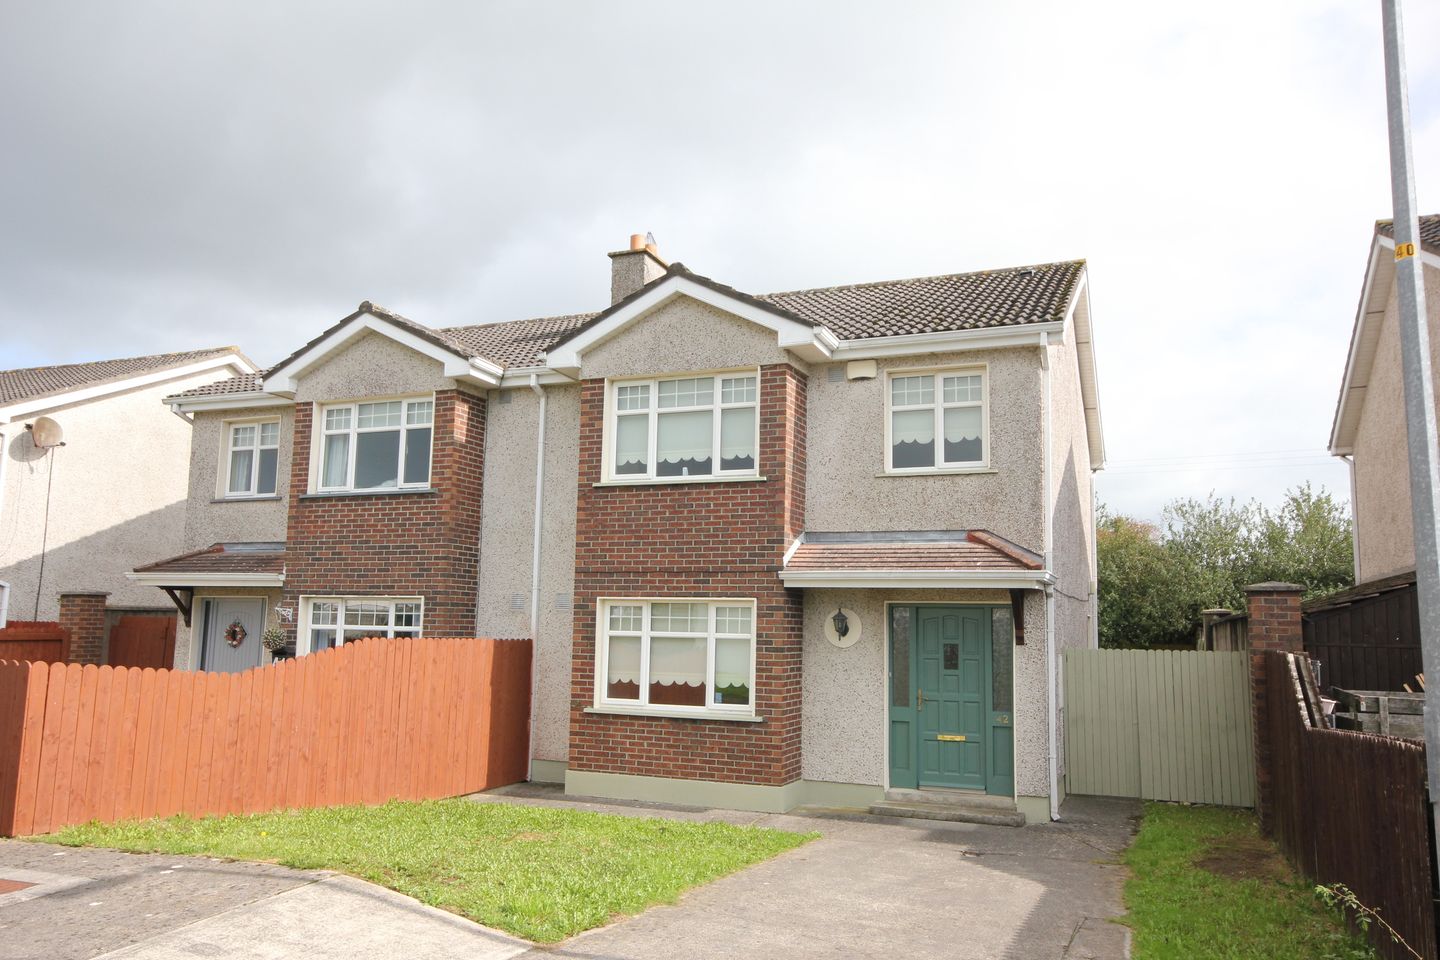 42 Rossvale Court, Mountmellick Road, Portlaoise, Co. Laois, R32NY9A